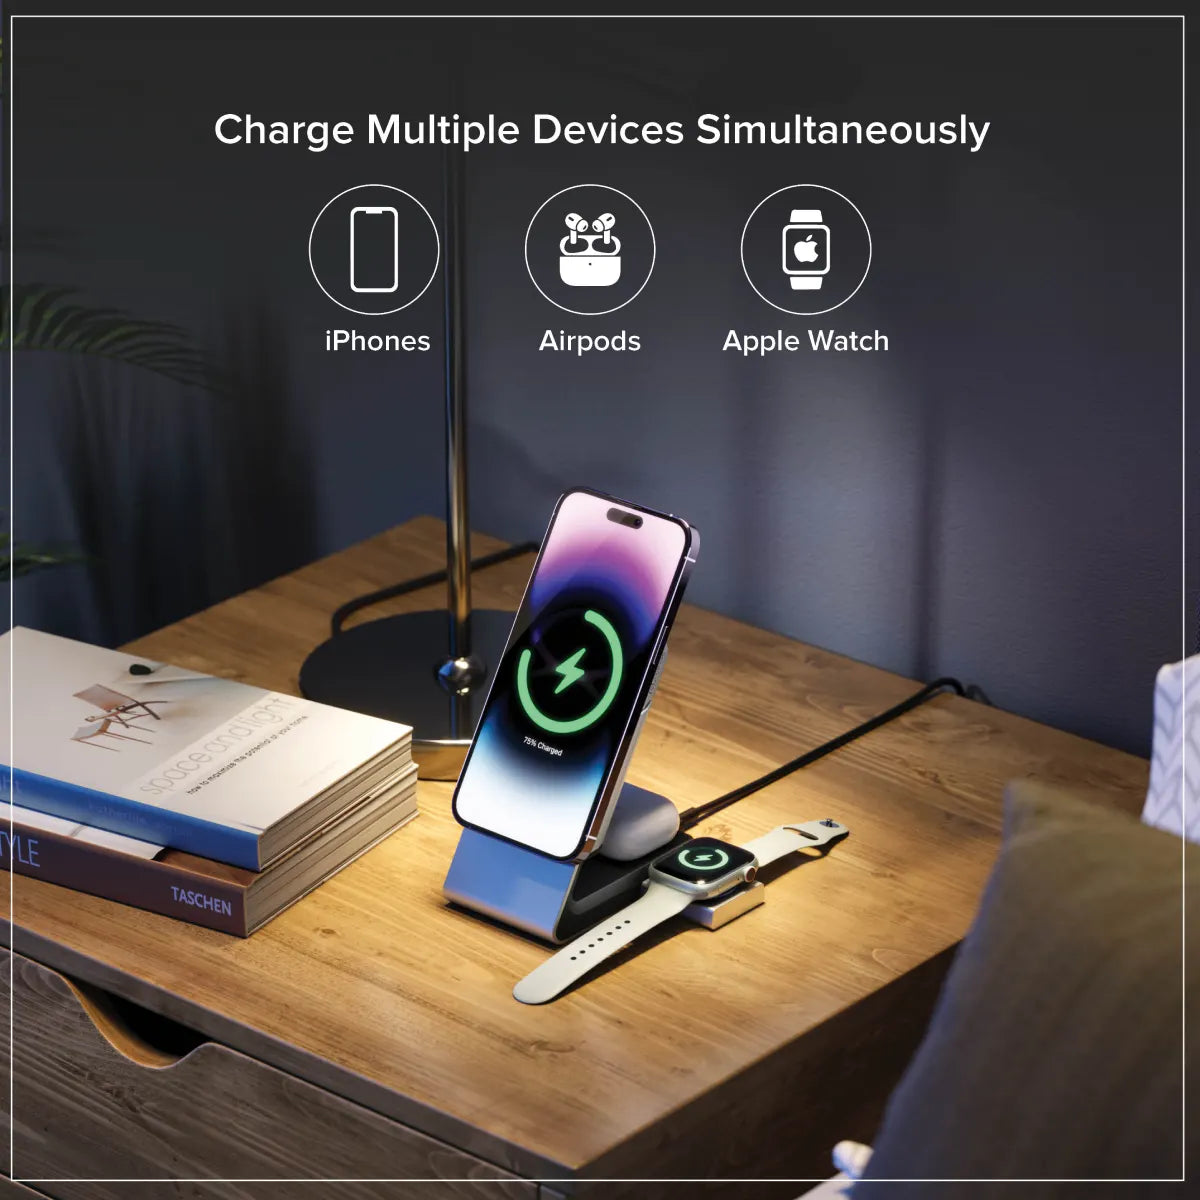 Matrix+ Flow 3-in-1 Charging Dock with Power Bank and Car Charger